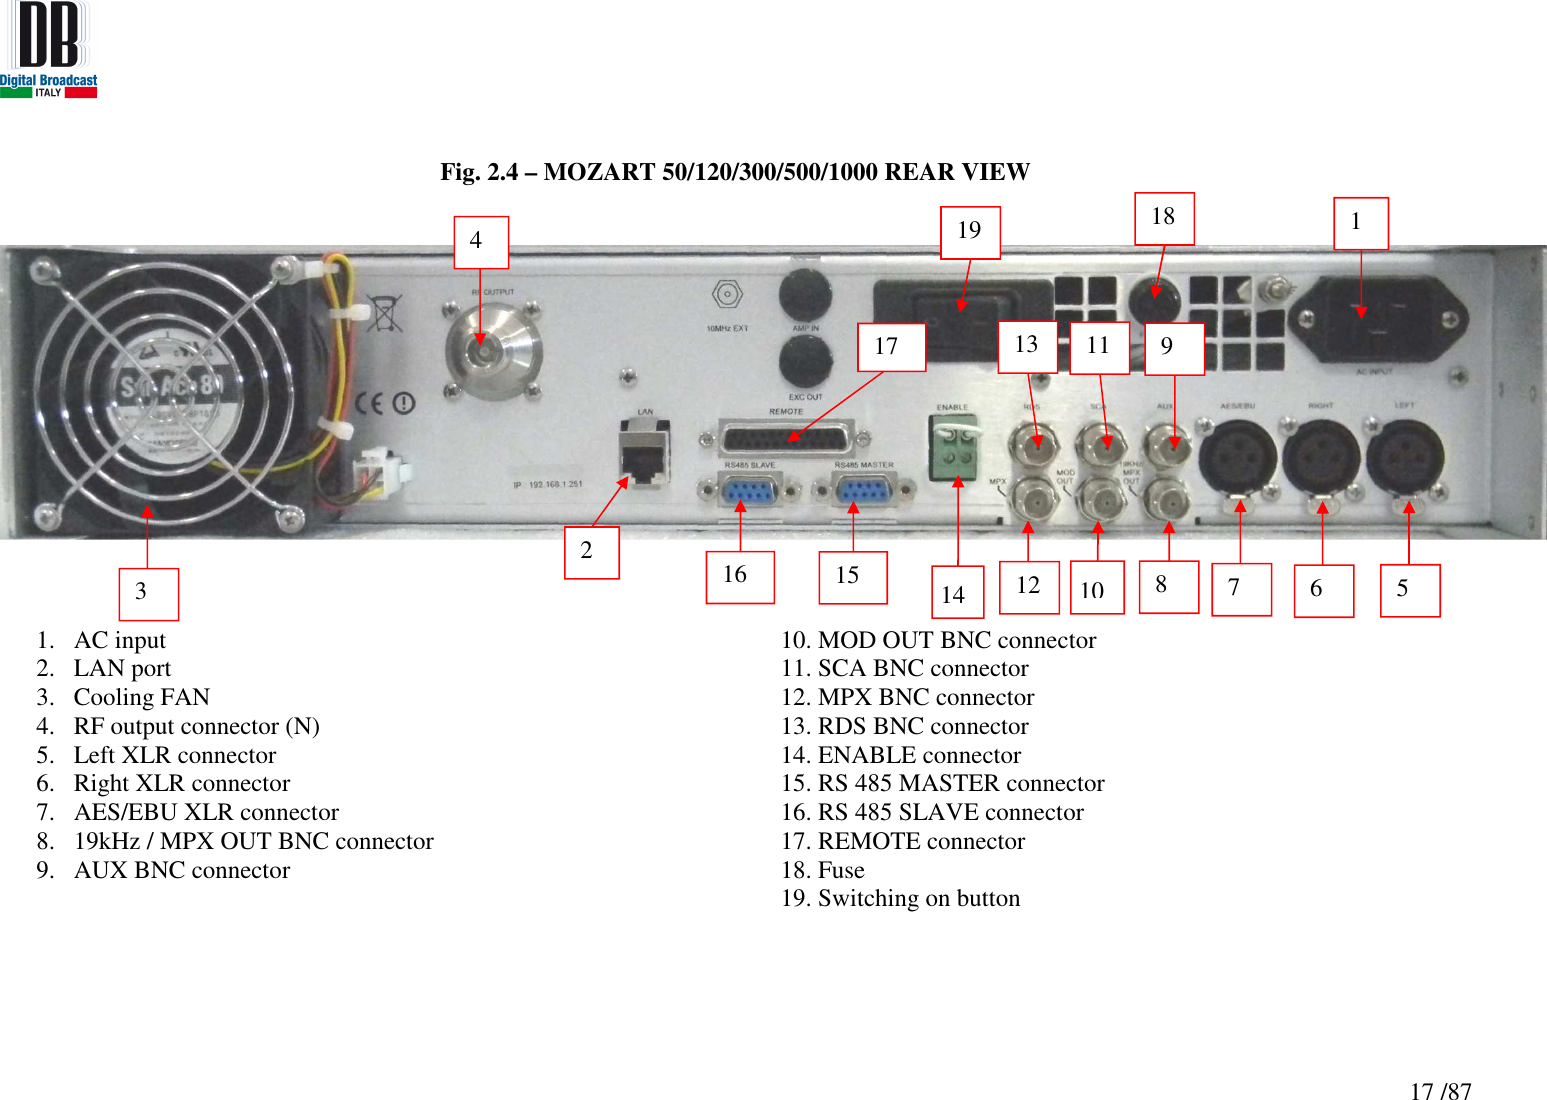   17 /87  Fig. 2.4 – MOZART 50/120/300/500/1000 REAR VIEW        1. AC input 2. LAN port 3. Cooling FAN 4. RF output connector (N) 5. Left XLR connector 6. Right XLR connector 7. AES/EBU XLR connector 8. 19kHz / MPX OUT BNC connector 9. AUX BNC connector 10. MOD OUT BNC connector 11. SCA BNC connector 12. MPX BNC connector 13. RDS BNC connector 14. ENABLE connector 15. RS 485 MASTER connector 16. RS 485 SLAVE connector 17. REMOTE connector 18. Fuse 19. Switching on button  2 1 5 3 4 6 7 15 16 17 12 9 11 13 10 14 8 18 19 